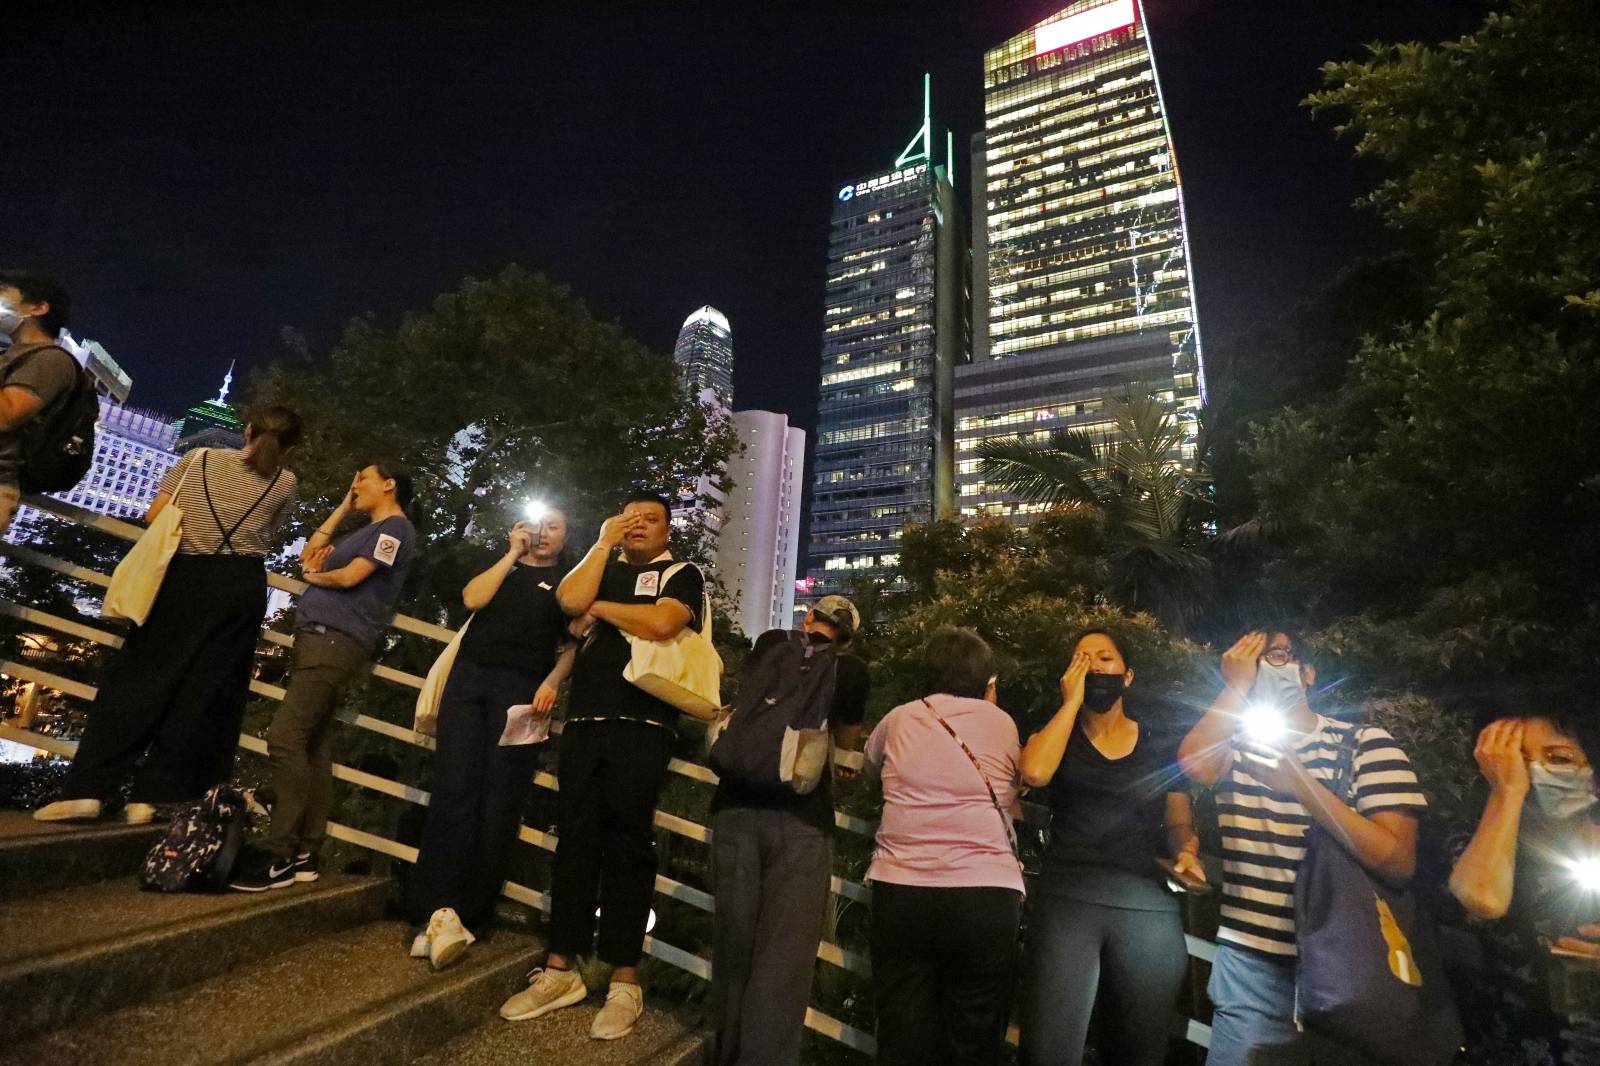 Protesters stand next to each other to form a human chain during a rally to call for political reforms in Hong Kong